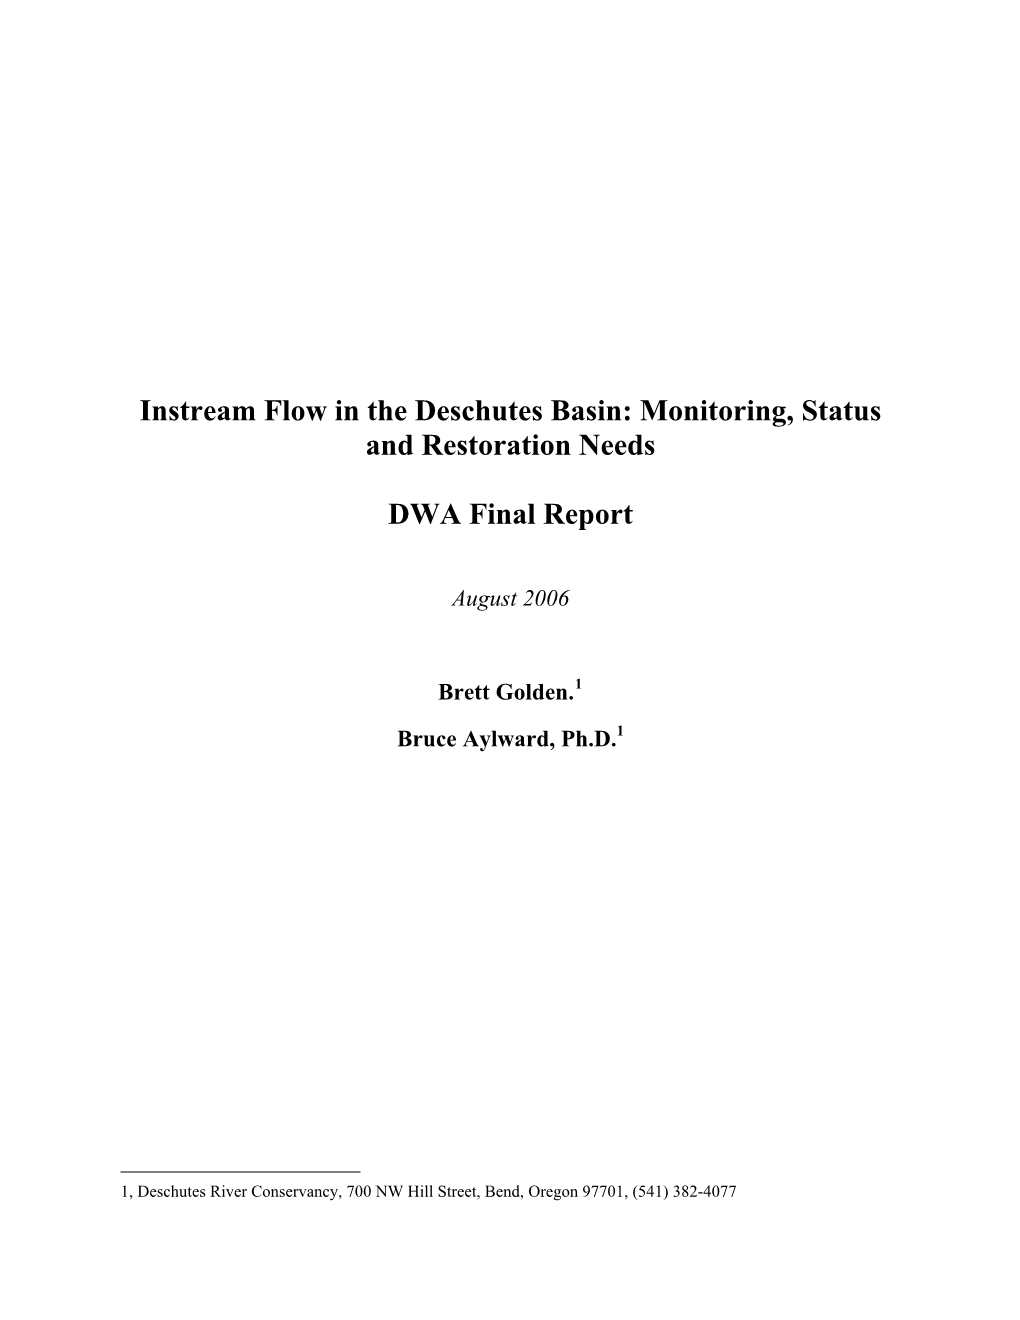 Instream Flows in the Deschutes Basin: Monitoring, Status, and Restoration Needs – August 2006